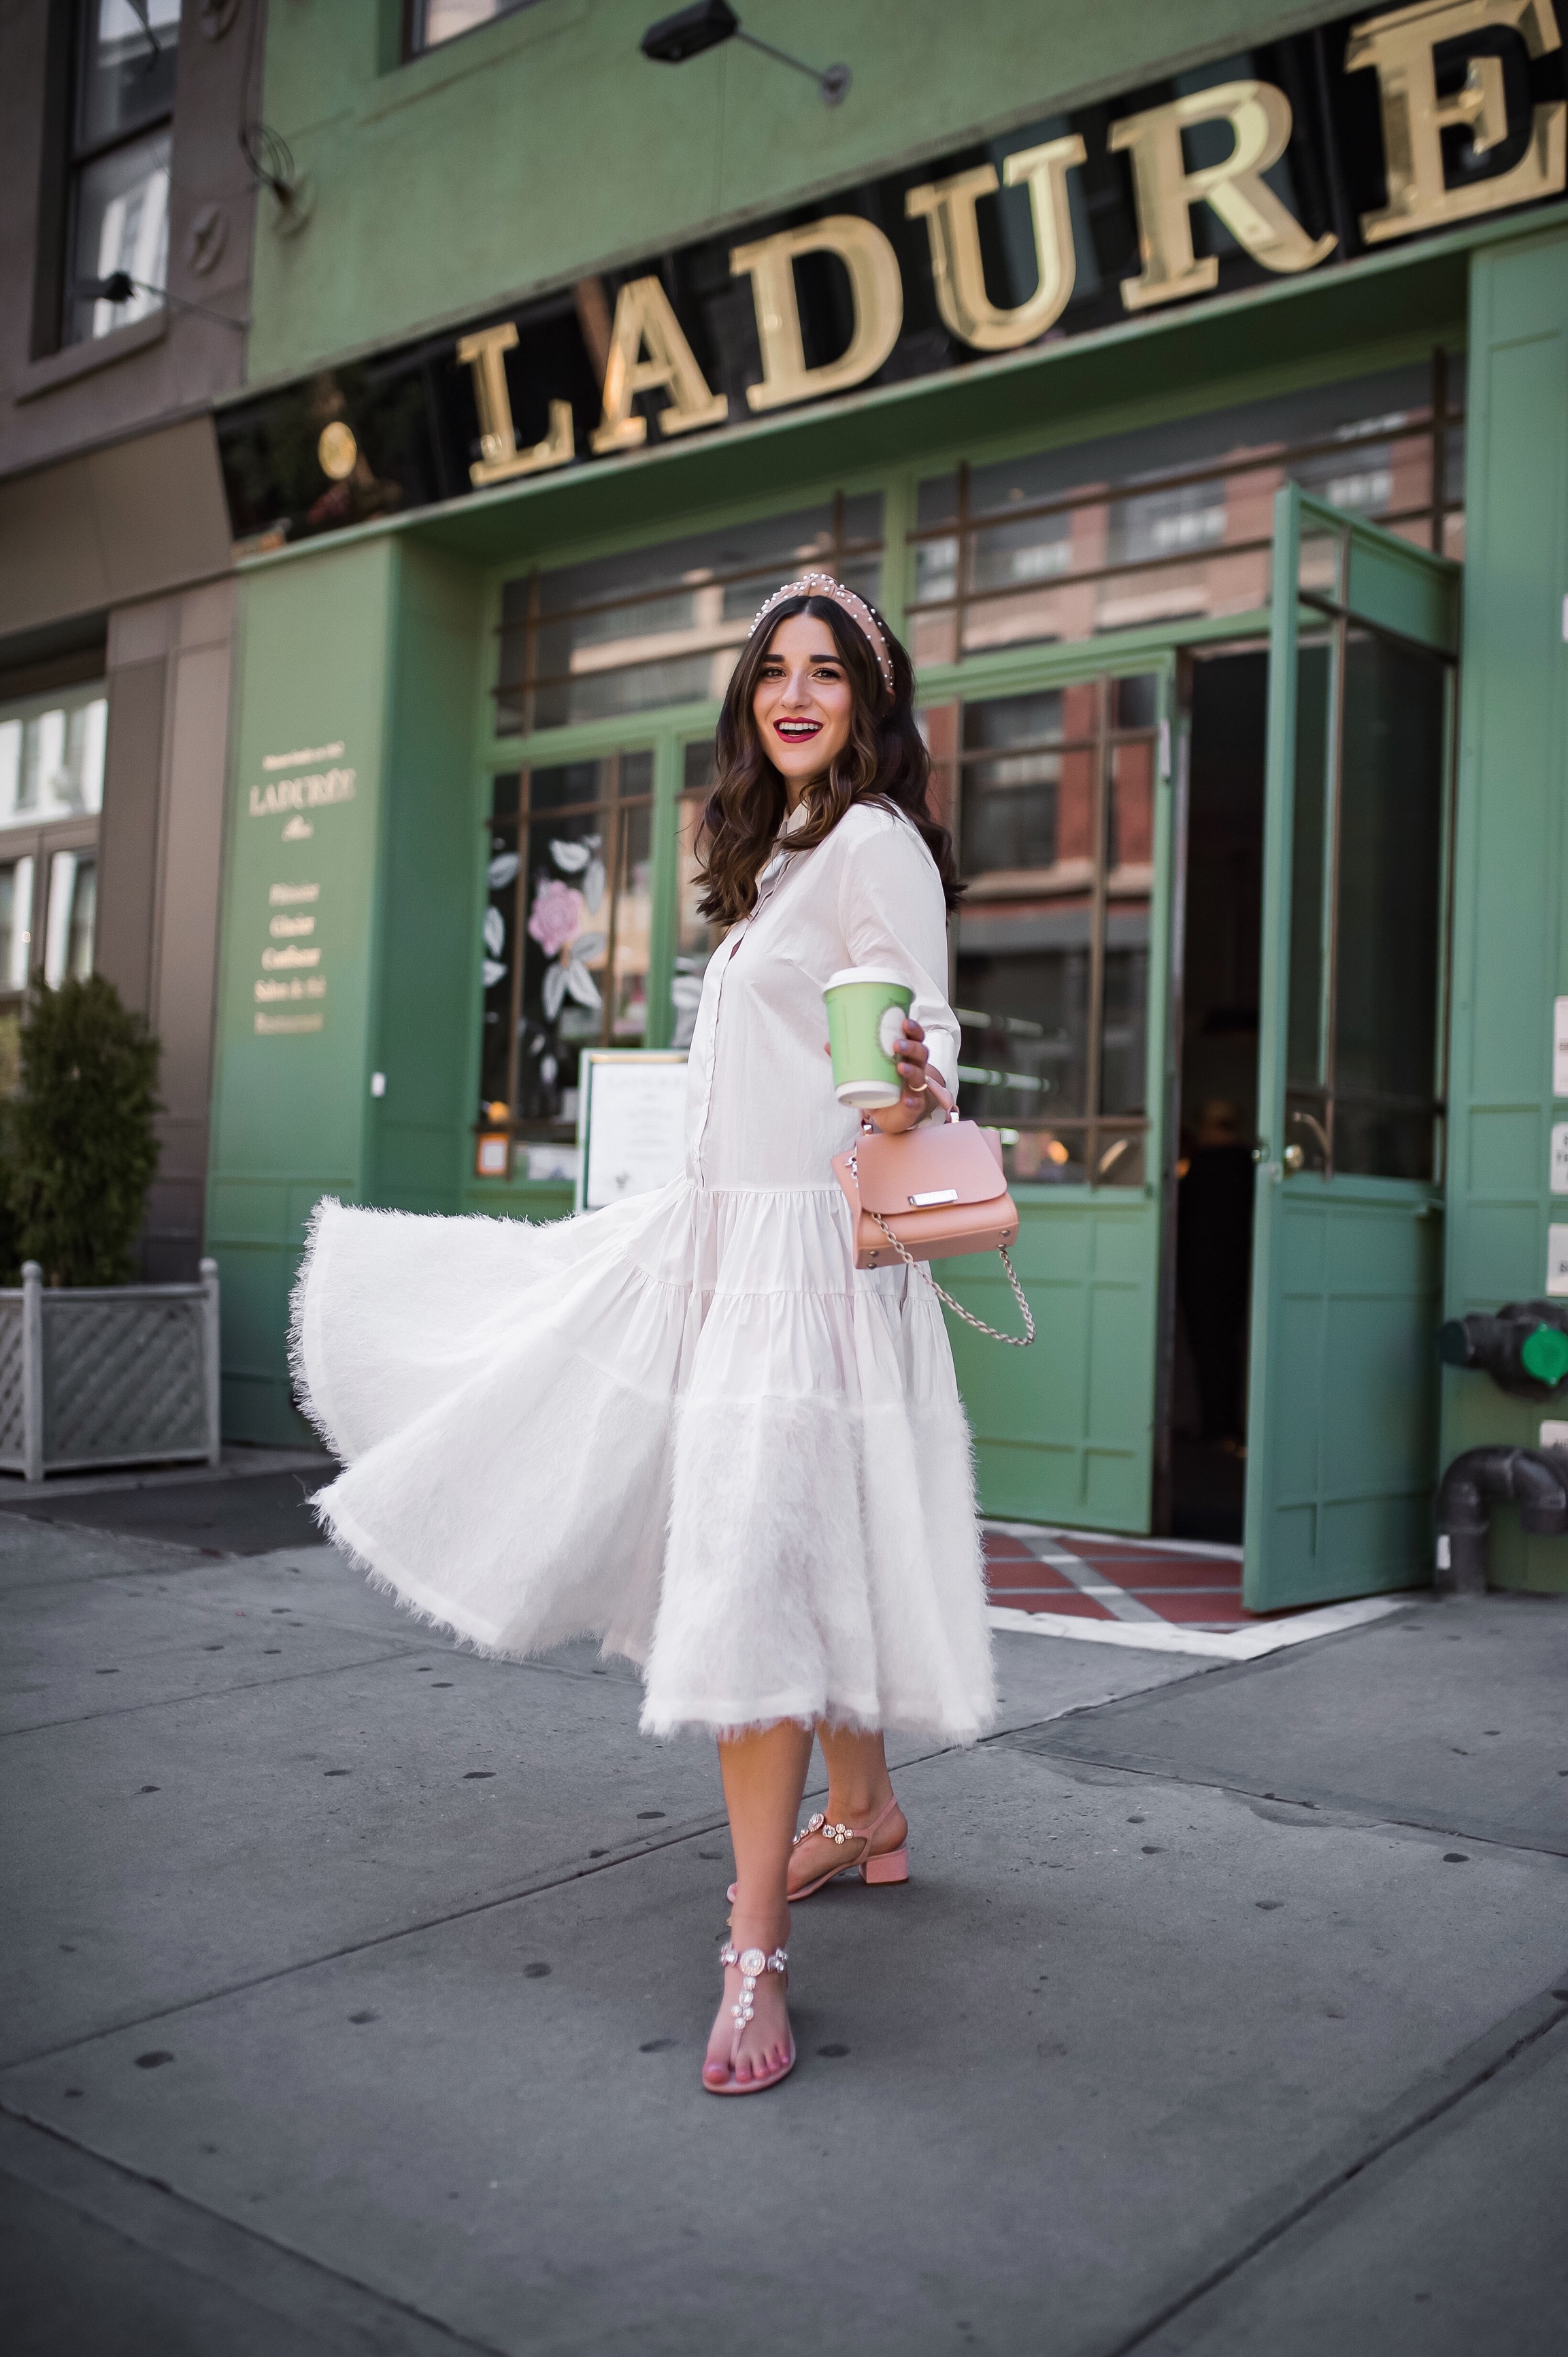 Debunking 8 Common Misconceptions About Fashion Bloggers White Midi Dress Pink Accessories Esther Santer Fashion Blog NYC Street Style Blogger Outfit OOTD Trendy Shopping Girl Headband How To Wear Pink Sandals Jeweled Zac Posen Bag Photoshoot La Duree.JPG